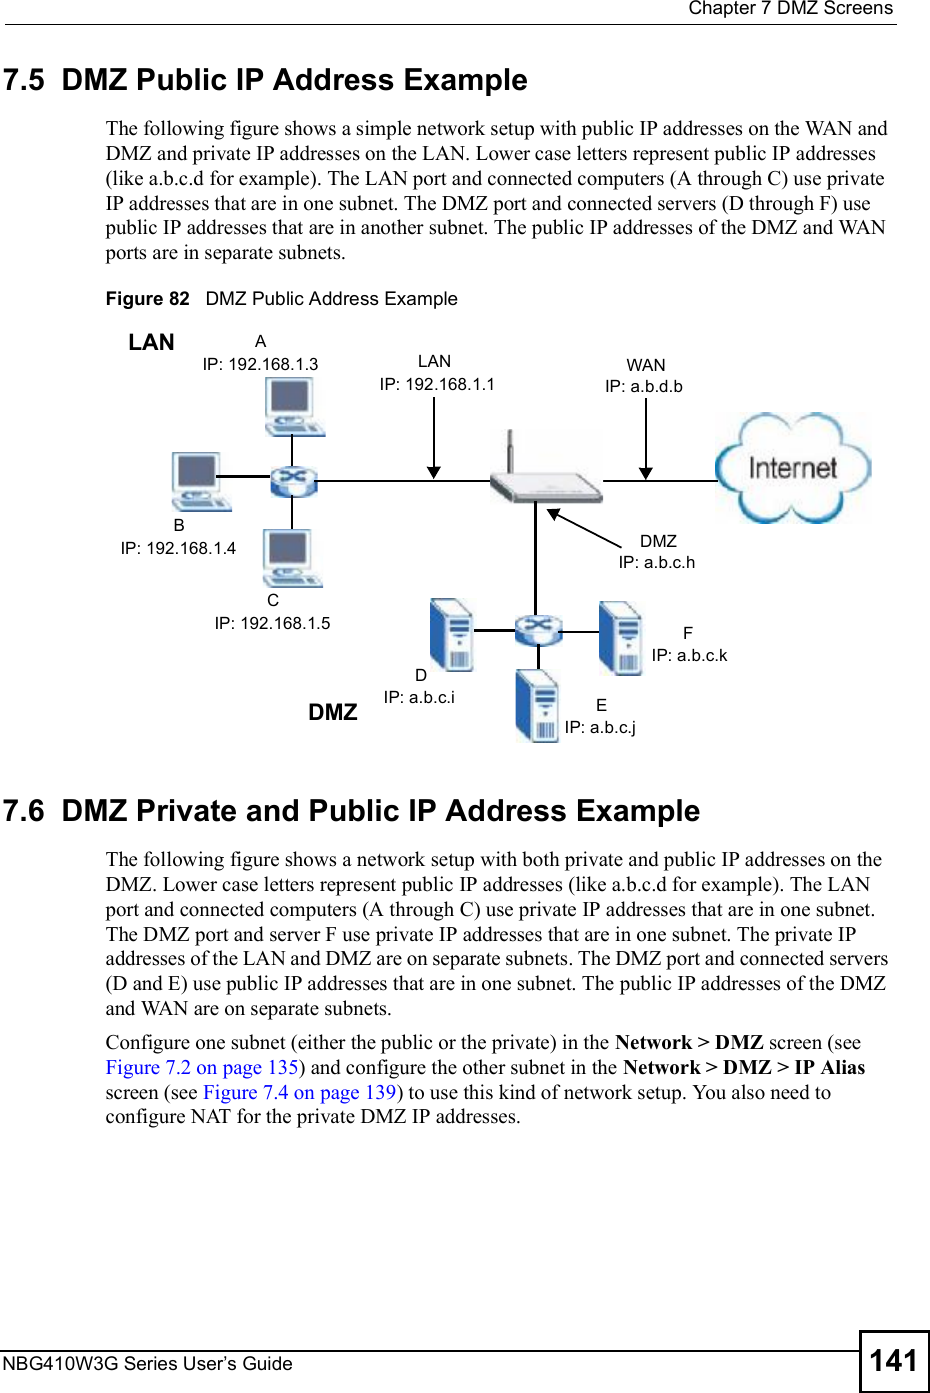  Chapter 7DMZ ScreensNBG410W3G Series User s Guide 1417.5  DMZ Public IP Address ExampleThe following figure shows a simple network setup with public IP addresses on the WAN and DMZ and private IP addresses on the LAN. Lower case letters represent public IP addresses (like a.b.c.d for example). The LAN port and connected computers (A through C) use private IP addresses that are in one subnet. The DMZ port and connected servers (D through F) use public IP addresses that are in another subnet. The public IP addresses of the DMZ and WAN ports are in separate subnets.Figure 82   DMZ Public Address Example7.6  DMZ Private and Public IP Address ExampleThe following figure shows a network setup with both private and public IP addresses on the DMZ. Lower case letters represent public IP addresses (like a.b.c.d for example). The LAN port and connected computers (A through C) use private IP addresses that are in one subnet. The DMZ port and server F use private IP addresses that are in one subnet. The private IP addresses of the LAN and DMZ are on separate subnets. The DMZ port and connected servers (D and E) use public IP addresses that are in one subnet. The public IP addresses of the DMZ and WAN are on separate subnets.Configure one subnet (either the public or the private) in the Network &gt; DMZ screen (see Figure 7.2 on page 135) and configure the other subnet in the Network &gt; DMZ &gt; IP Alias screen (see Figure 7.4 on page 139) to use this kind of network setup. You also need to configure NAT for the private DMZ IP addresses.AIP: 192.168.1.3BIP: 192.168.1.4CIP: 192.168.1.5LAN LANIP: 192.168.1.1DIP: a.b.c.i EIP: a.b.c.jFIP: a.b.c.kDMZDMZIP: a.b.c.hWANIP: a.b.d.b